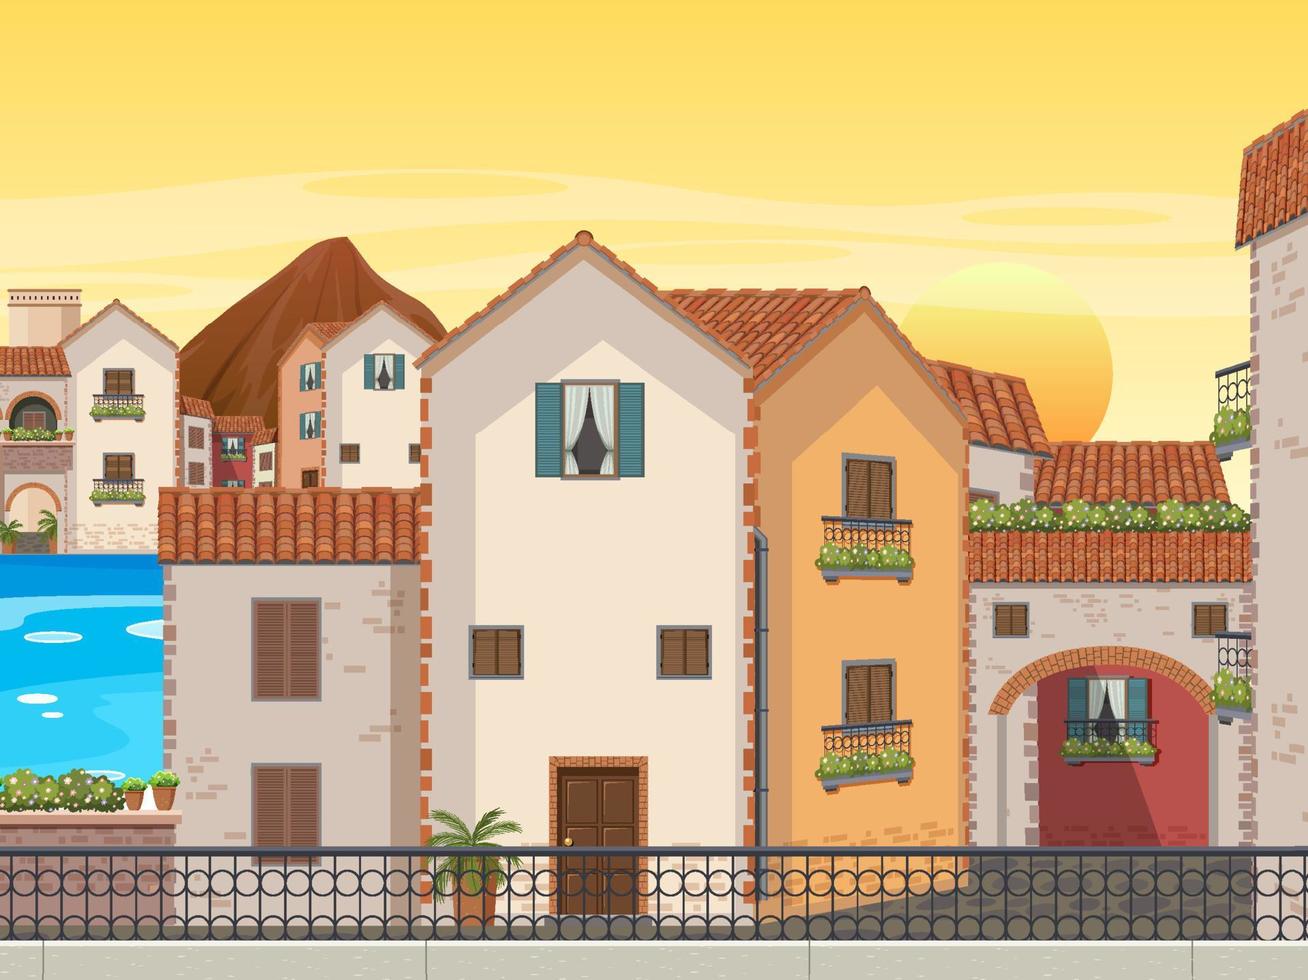 Italy town style house and building landscape vector